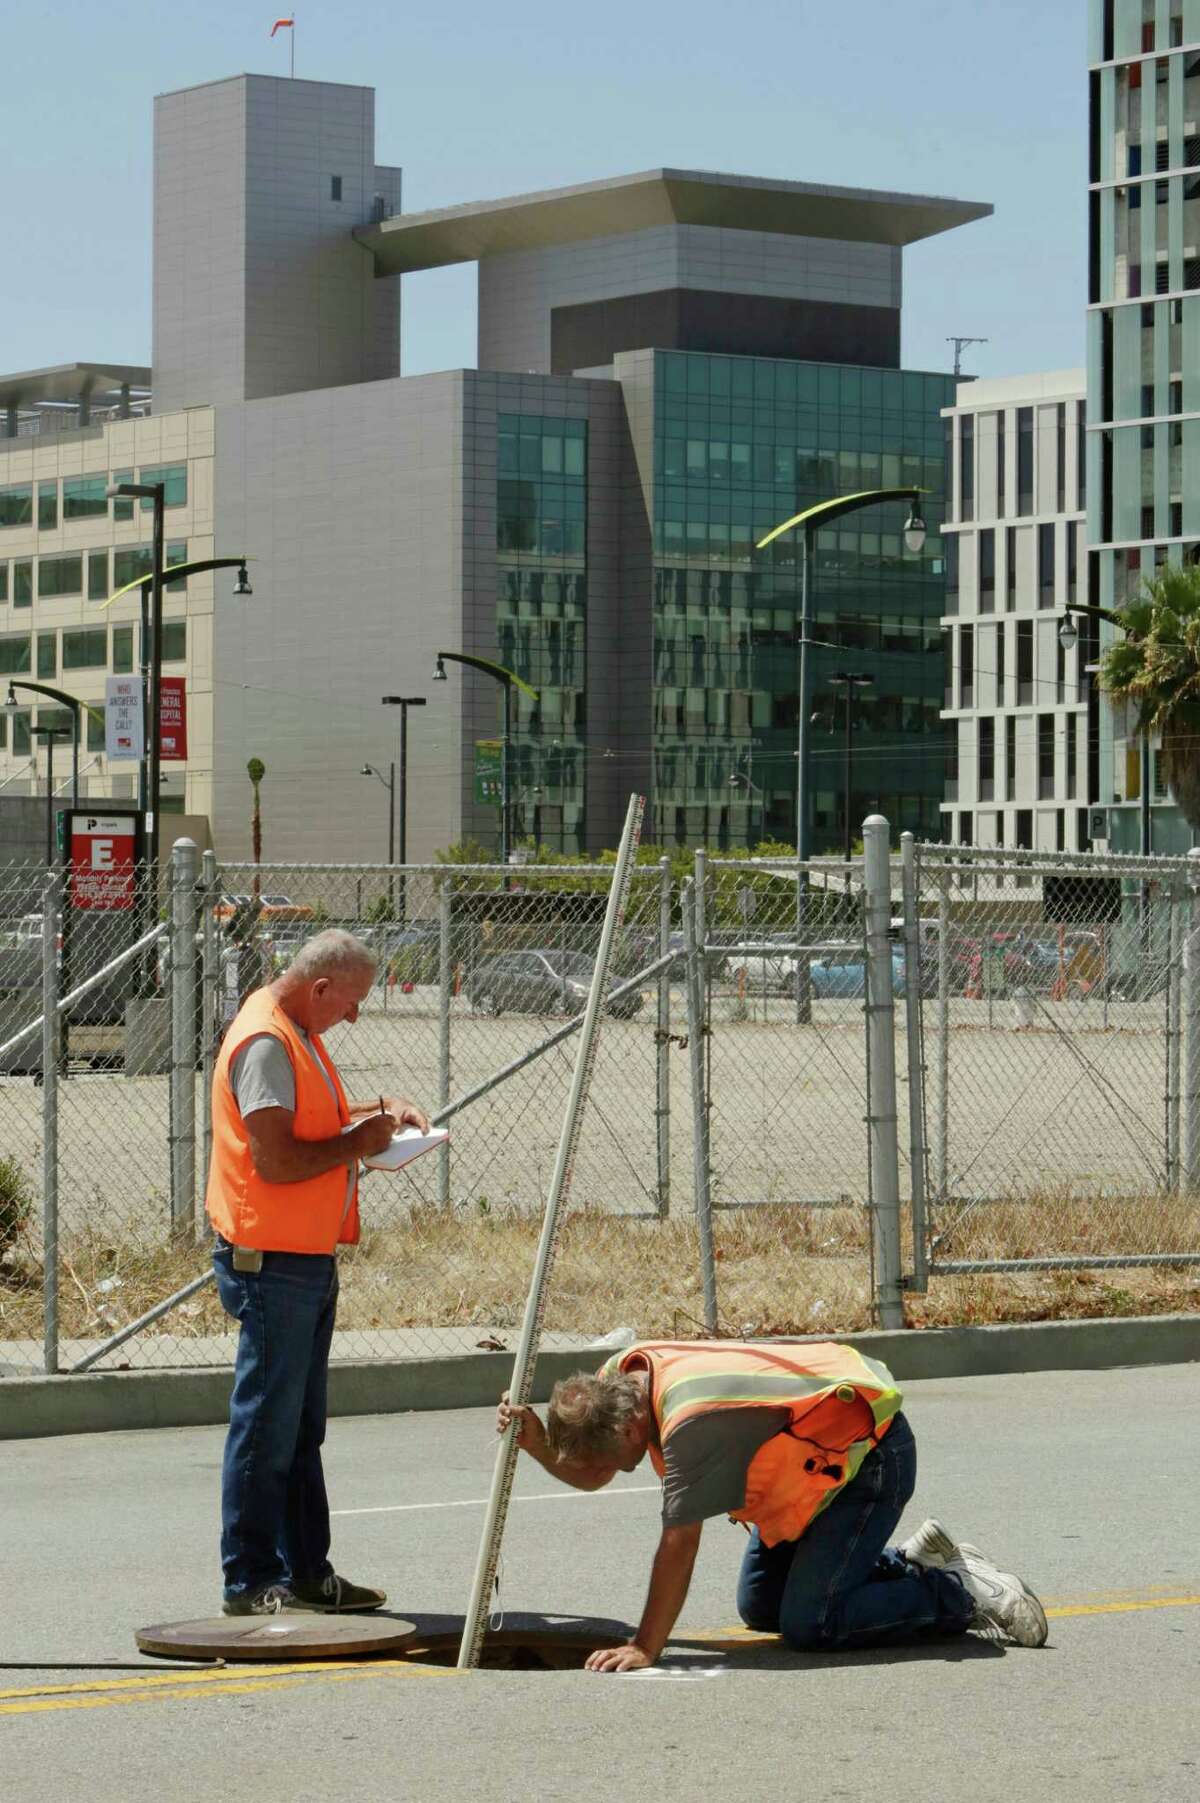 Land surveyors John Seace (left) and Frank Montemurro work on South Street next to the proposed site for a new Golden State Warriors arena. The UCSF Medical Center can be seen in the background.